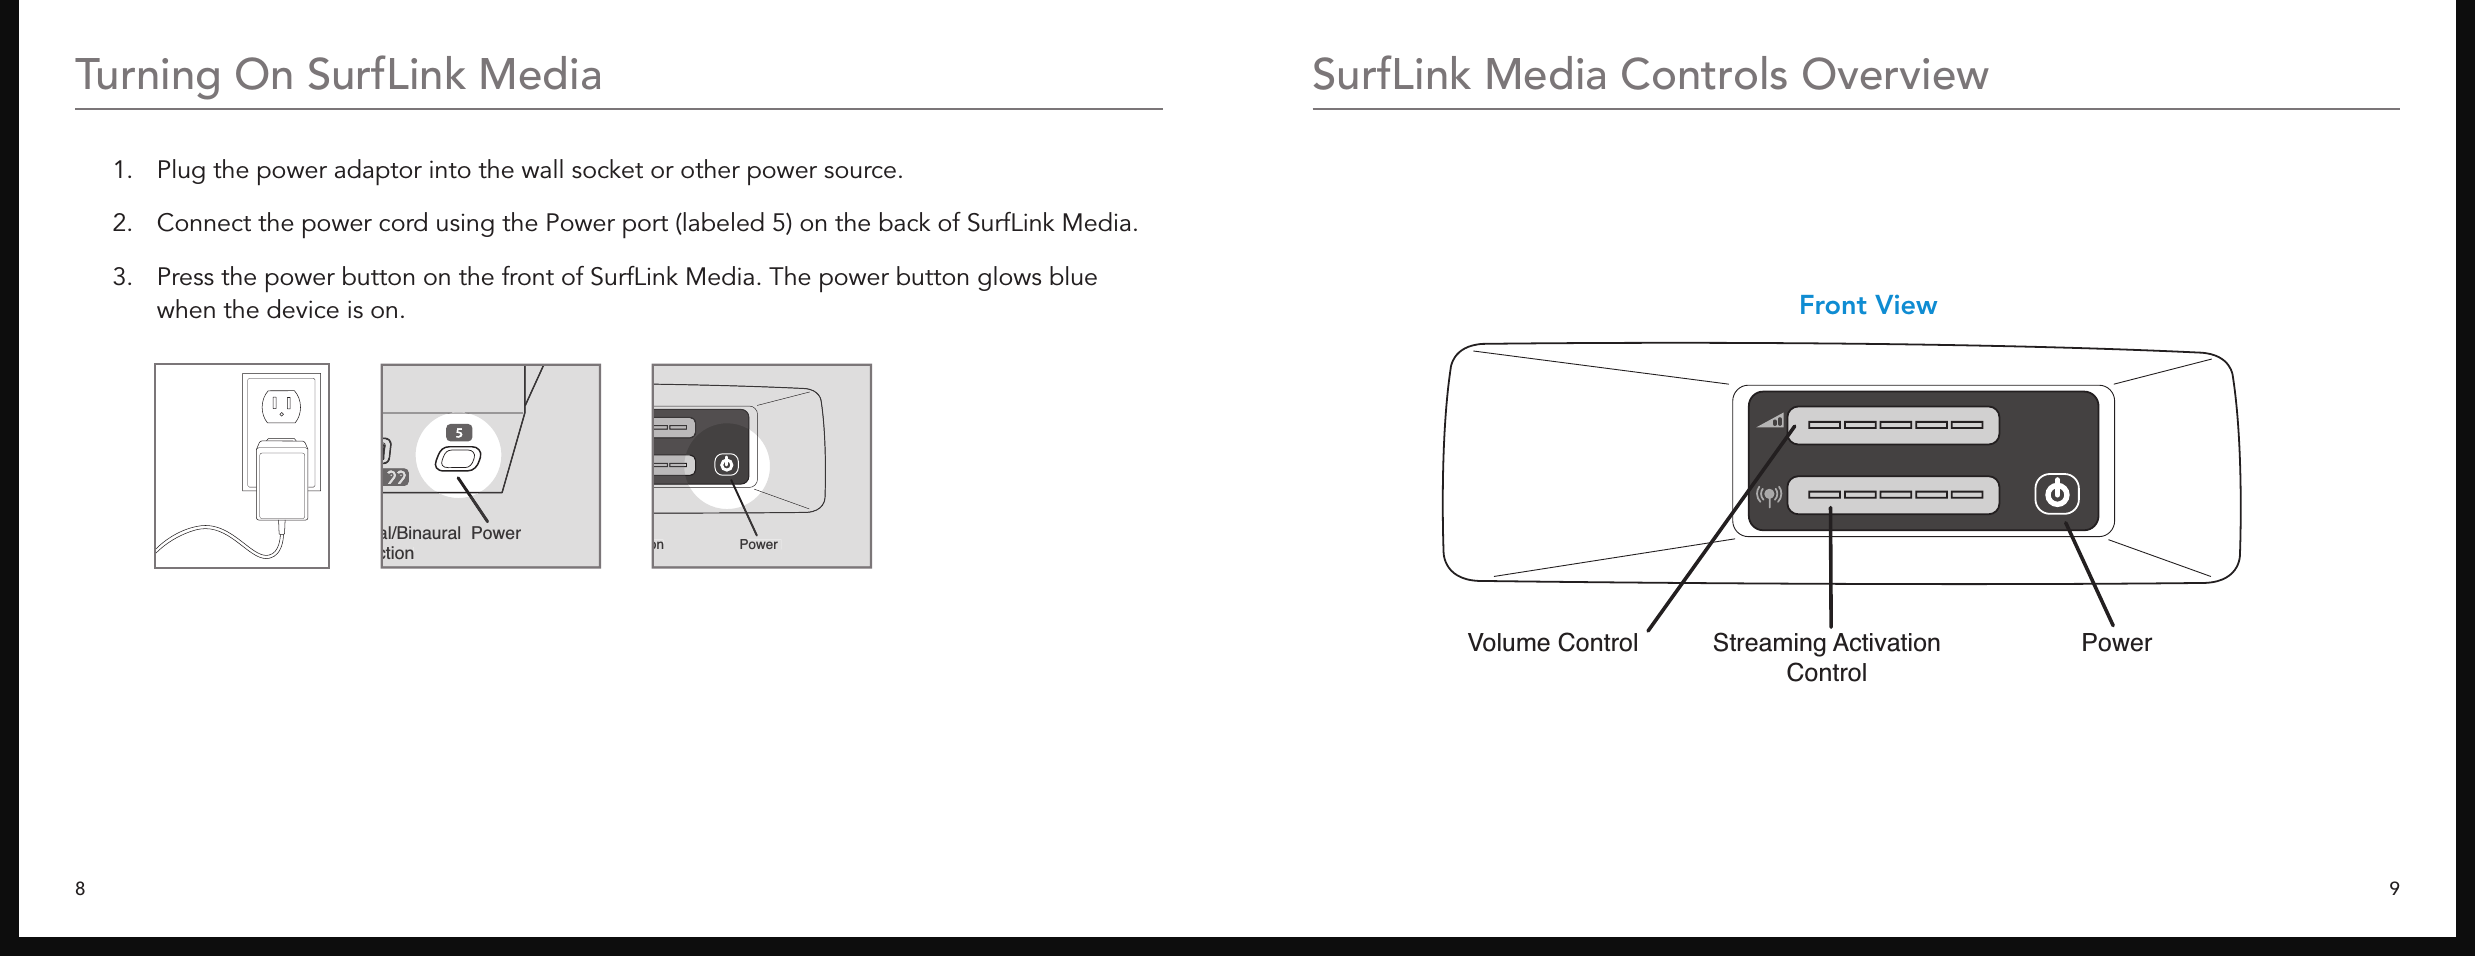 8 9Turning On SurfLink Media  1.   Plug the power adaptor into the wall socket or other power source. 2. ConnectthepowercordusingthePowerport(labeled5)onthebackofSurfLinkMedia.  3.    Press the power button on the front of SurfLink Media. The power button glows blue when the device is on.Power   Streaming ActivationControlVolume Control    Microphone     RCA Jacks      Optical      S/PDIF    Monaural/Binaural  PowerTOSLINK                        Selection     Optical      S/PDIF    Monaural/Binaural  PowerSLINK                        SelectionPower   Streaming ActivationControlVolume Control    Microphone     RCA Jacks      Optical      S/PDIF    Monaural/Binaural  PowerTOSLINK                        SelectionPower  ActivationSurfLink Media Controls OverviewPower   Streaming ActivationControlVolume Control    Microphone     RCA Jacks      Optical      S/PDIF    Monaural/Binaural  PowerTOSLINK                        SelectionFront View